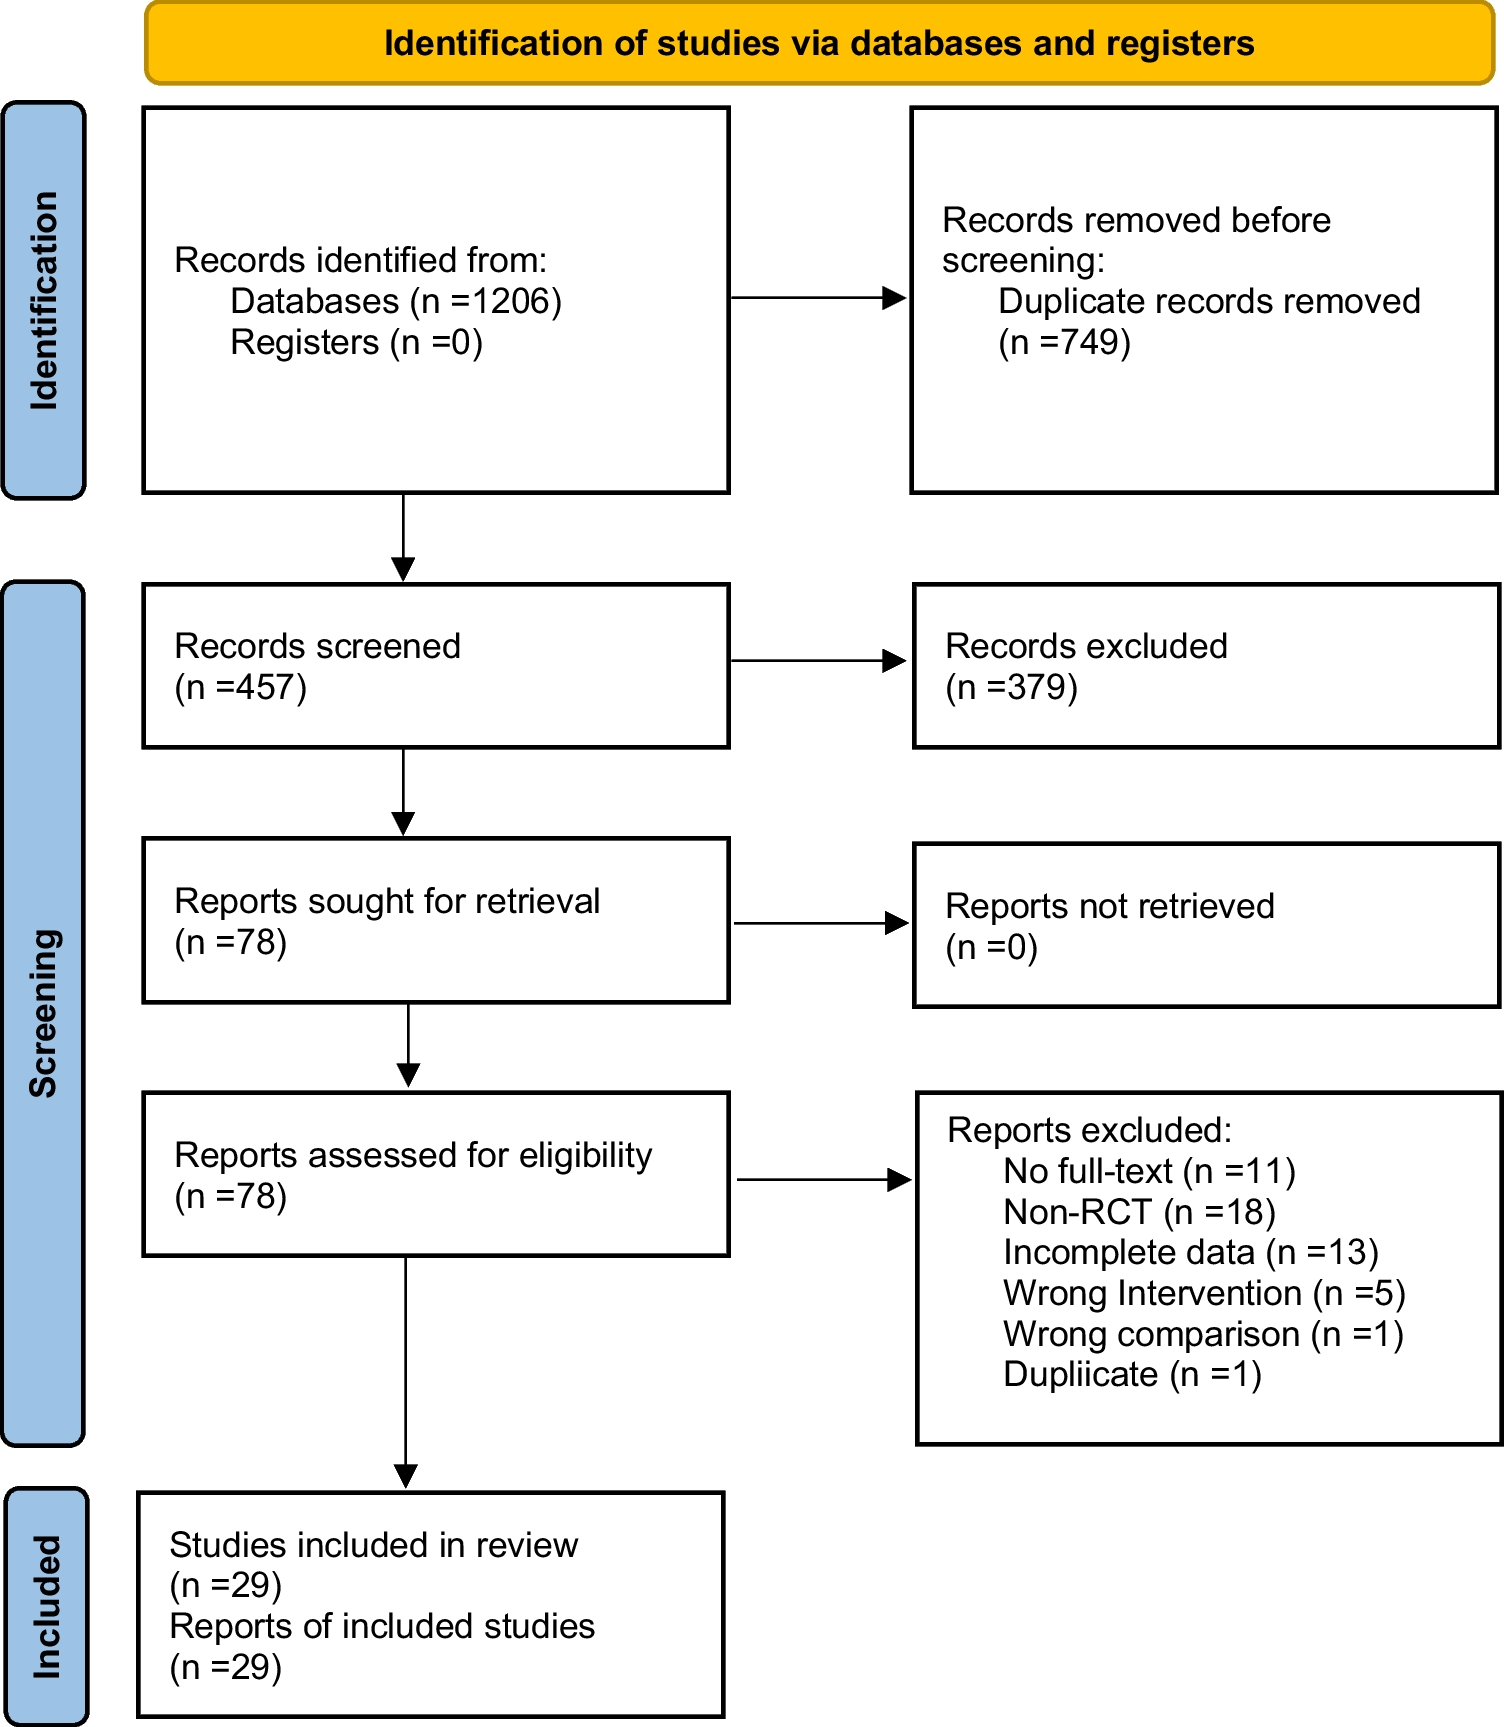 Effects of different modalities of transcranial magnetic stimulation on post-stroke cognitive impairment: a network meta-analysis